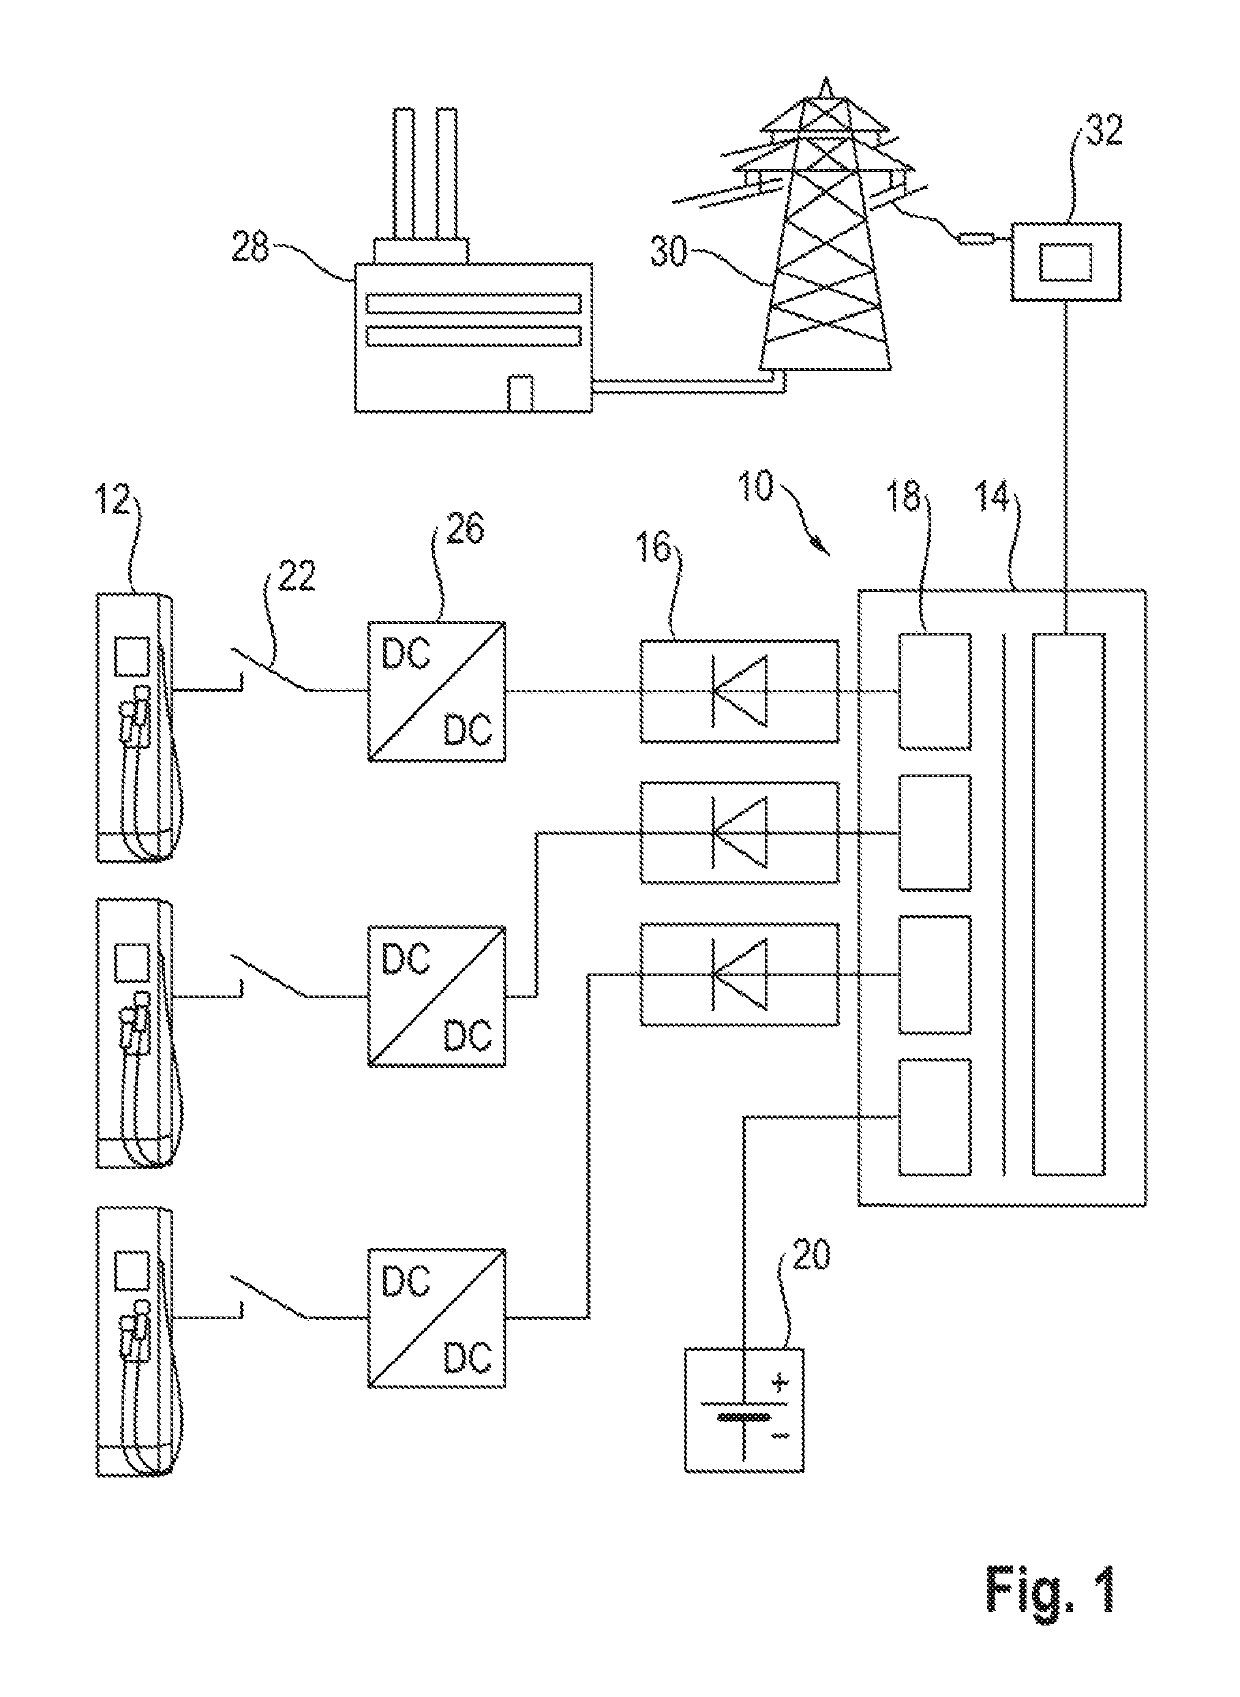 Modular power electronics system for charging an electrically operated vehicle